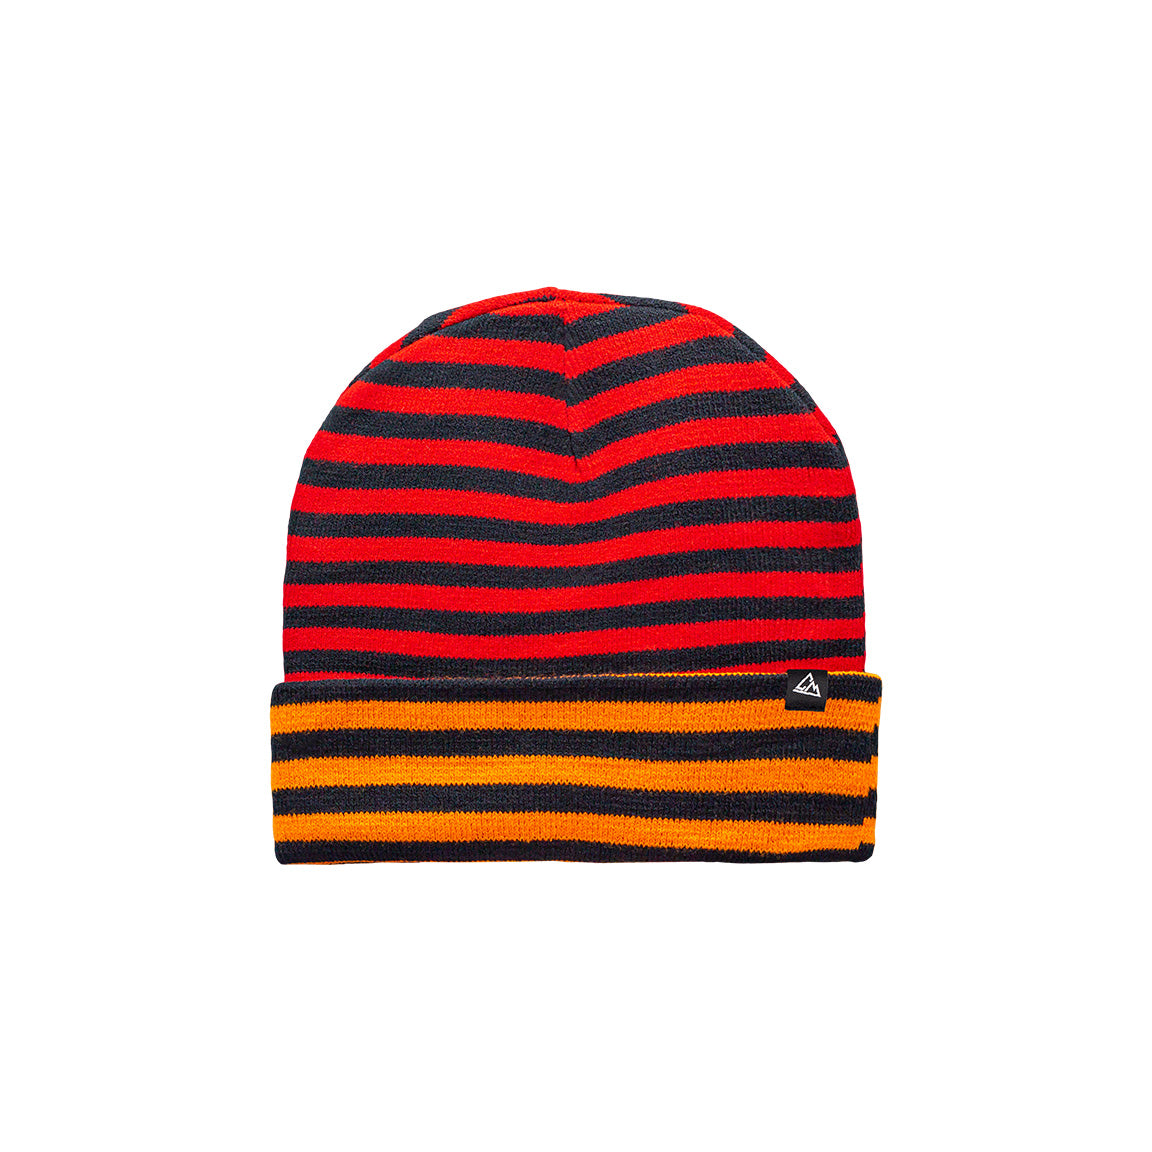 A vibrant red beanie with black stripes, finished with an orange and black striped band at the base, and a small triangular logo near the rim.